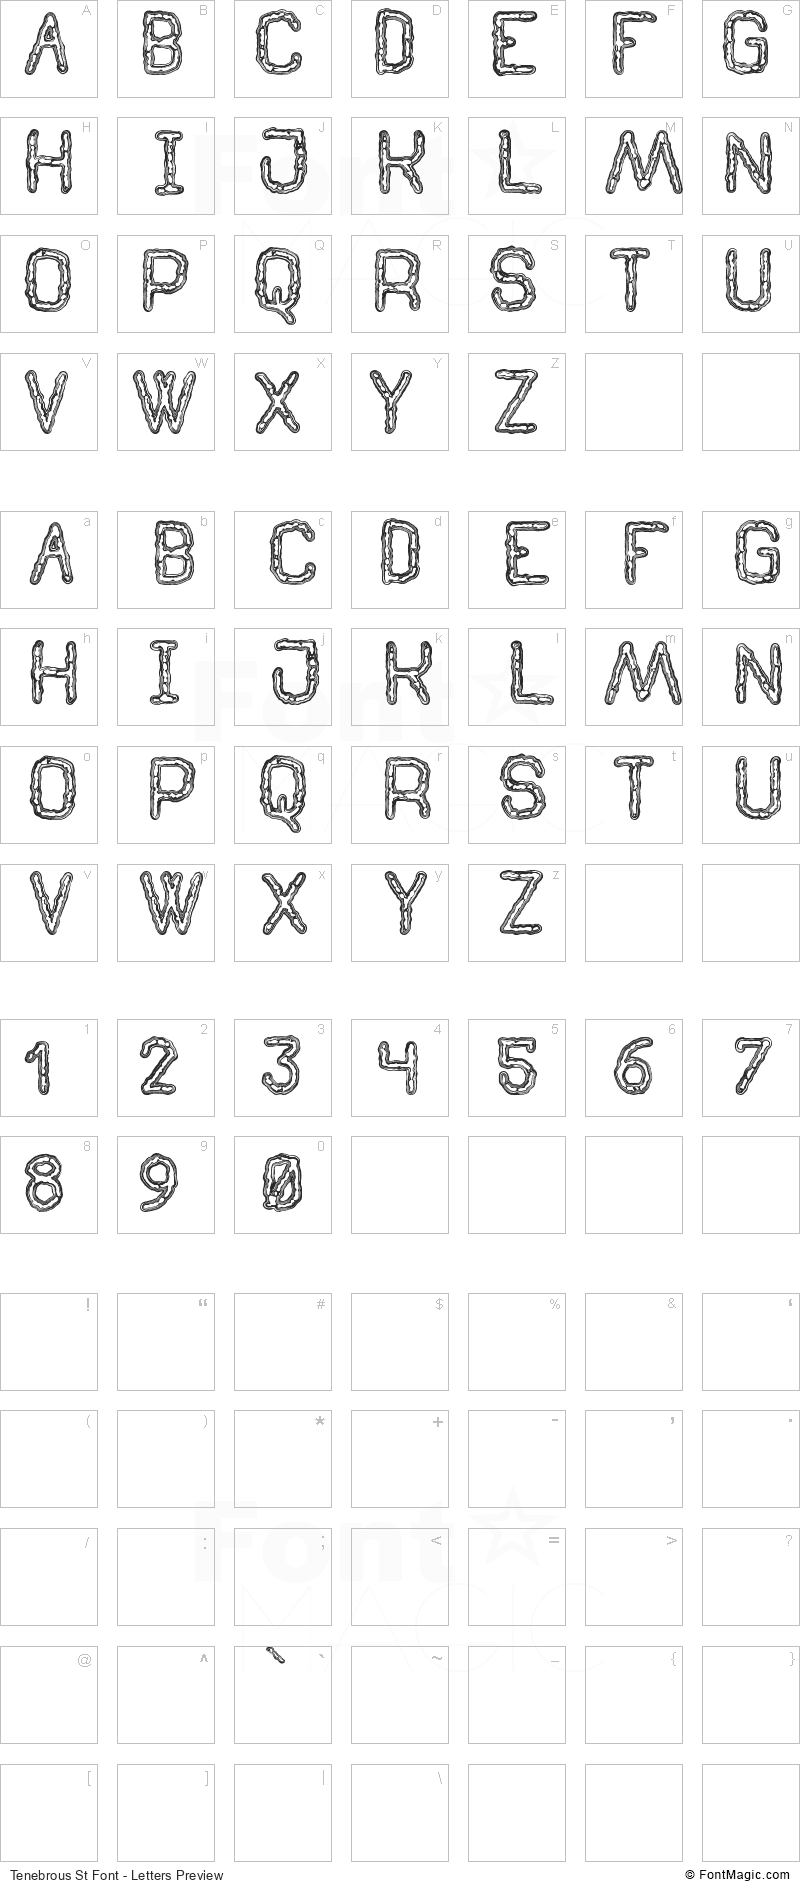 Tenebrous St Font - All Latters Preview Chart